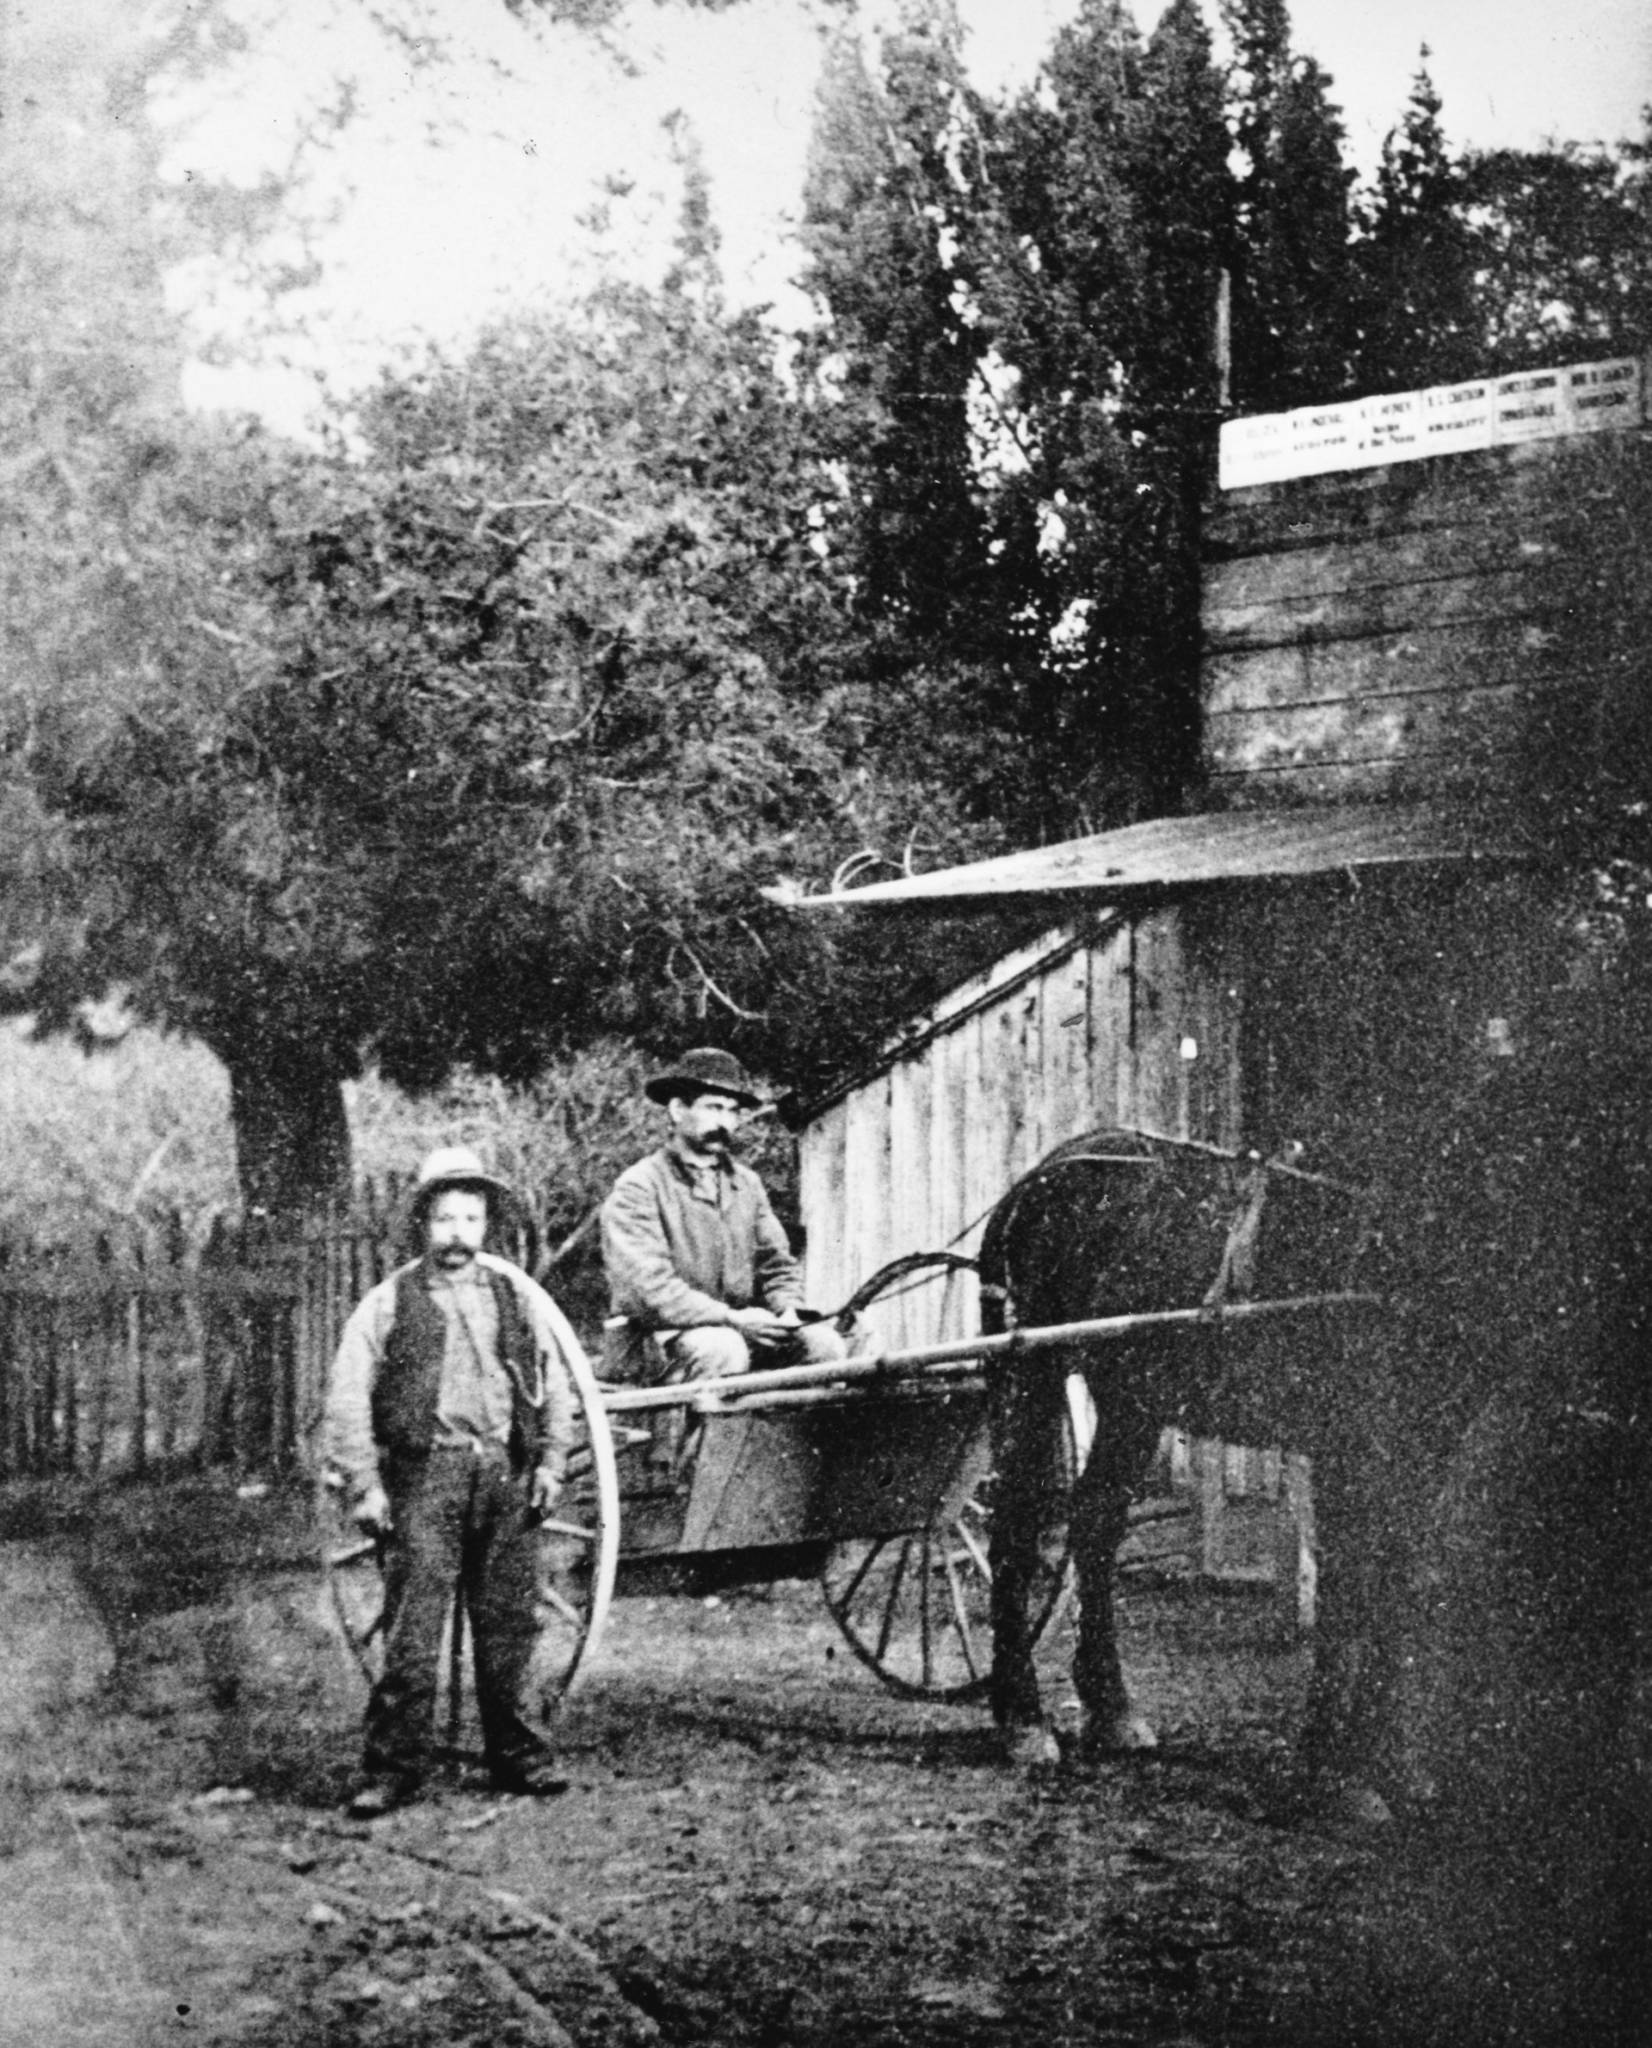 The earliest known photo of Casa de Tableta, c. 1880 - 1890s. By 1868, Felix Buelna had sold the property to William Stanton. Buelna’s grandson believes that his grandfather lost all of his property in a rigged poker game at the Searsville Saloon. Pictured here is barkeeper Rodriguez “Jo” Crovello with Stanton in front of the inn, then called “Black Chapete’s.”